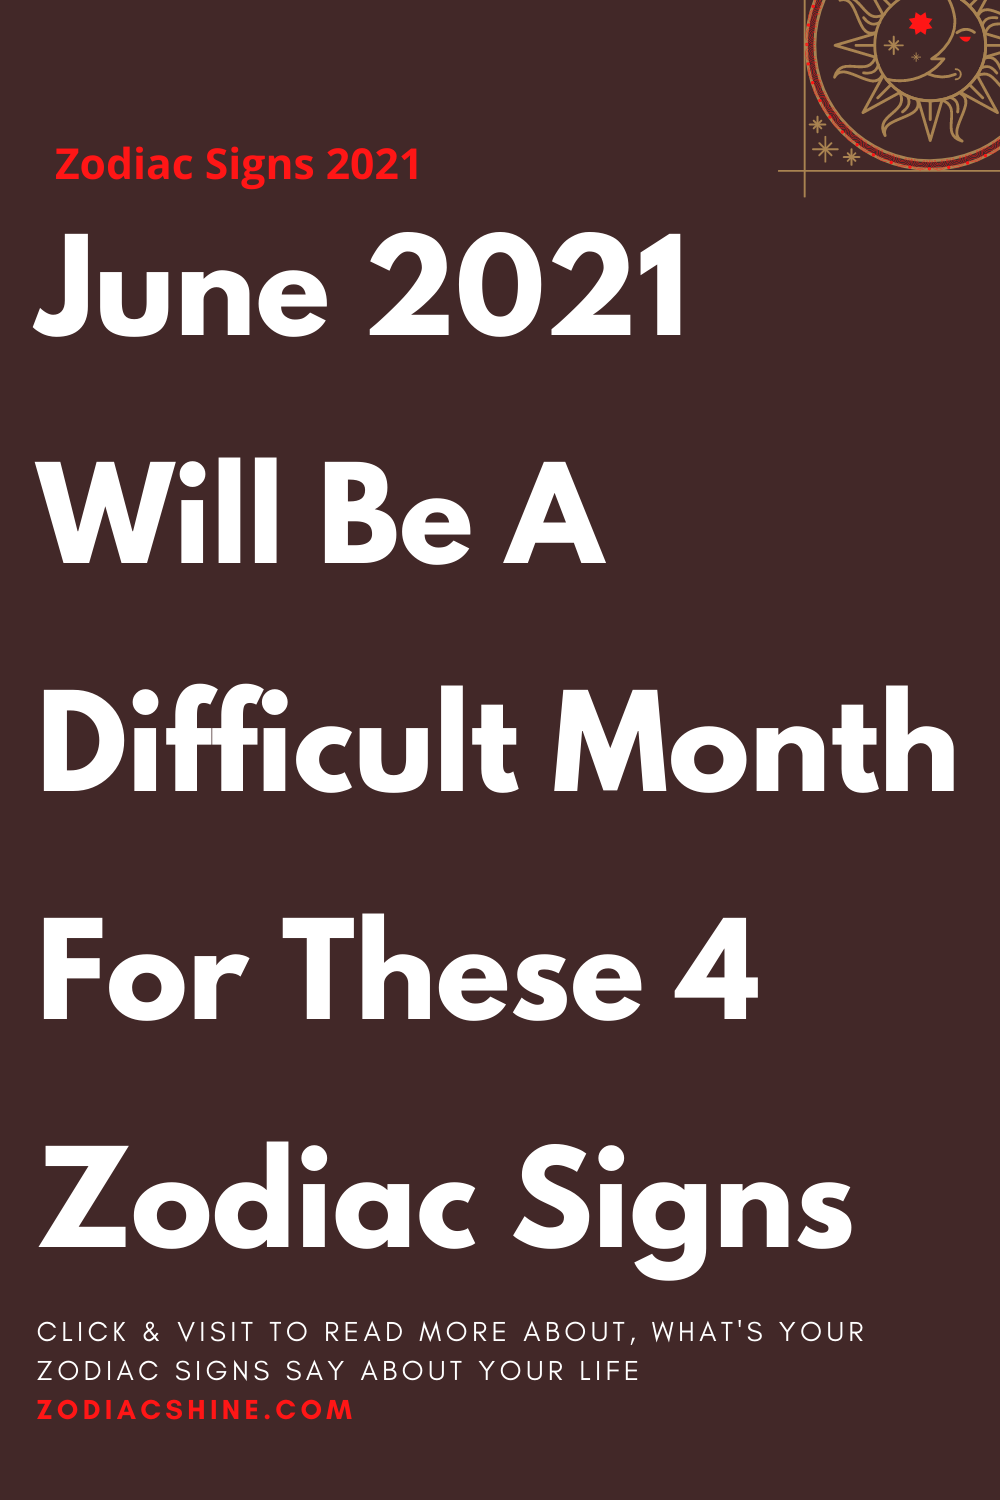 June 2021 Will Be A Difficult Month For These 4 Zodiac Signs